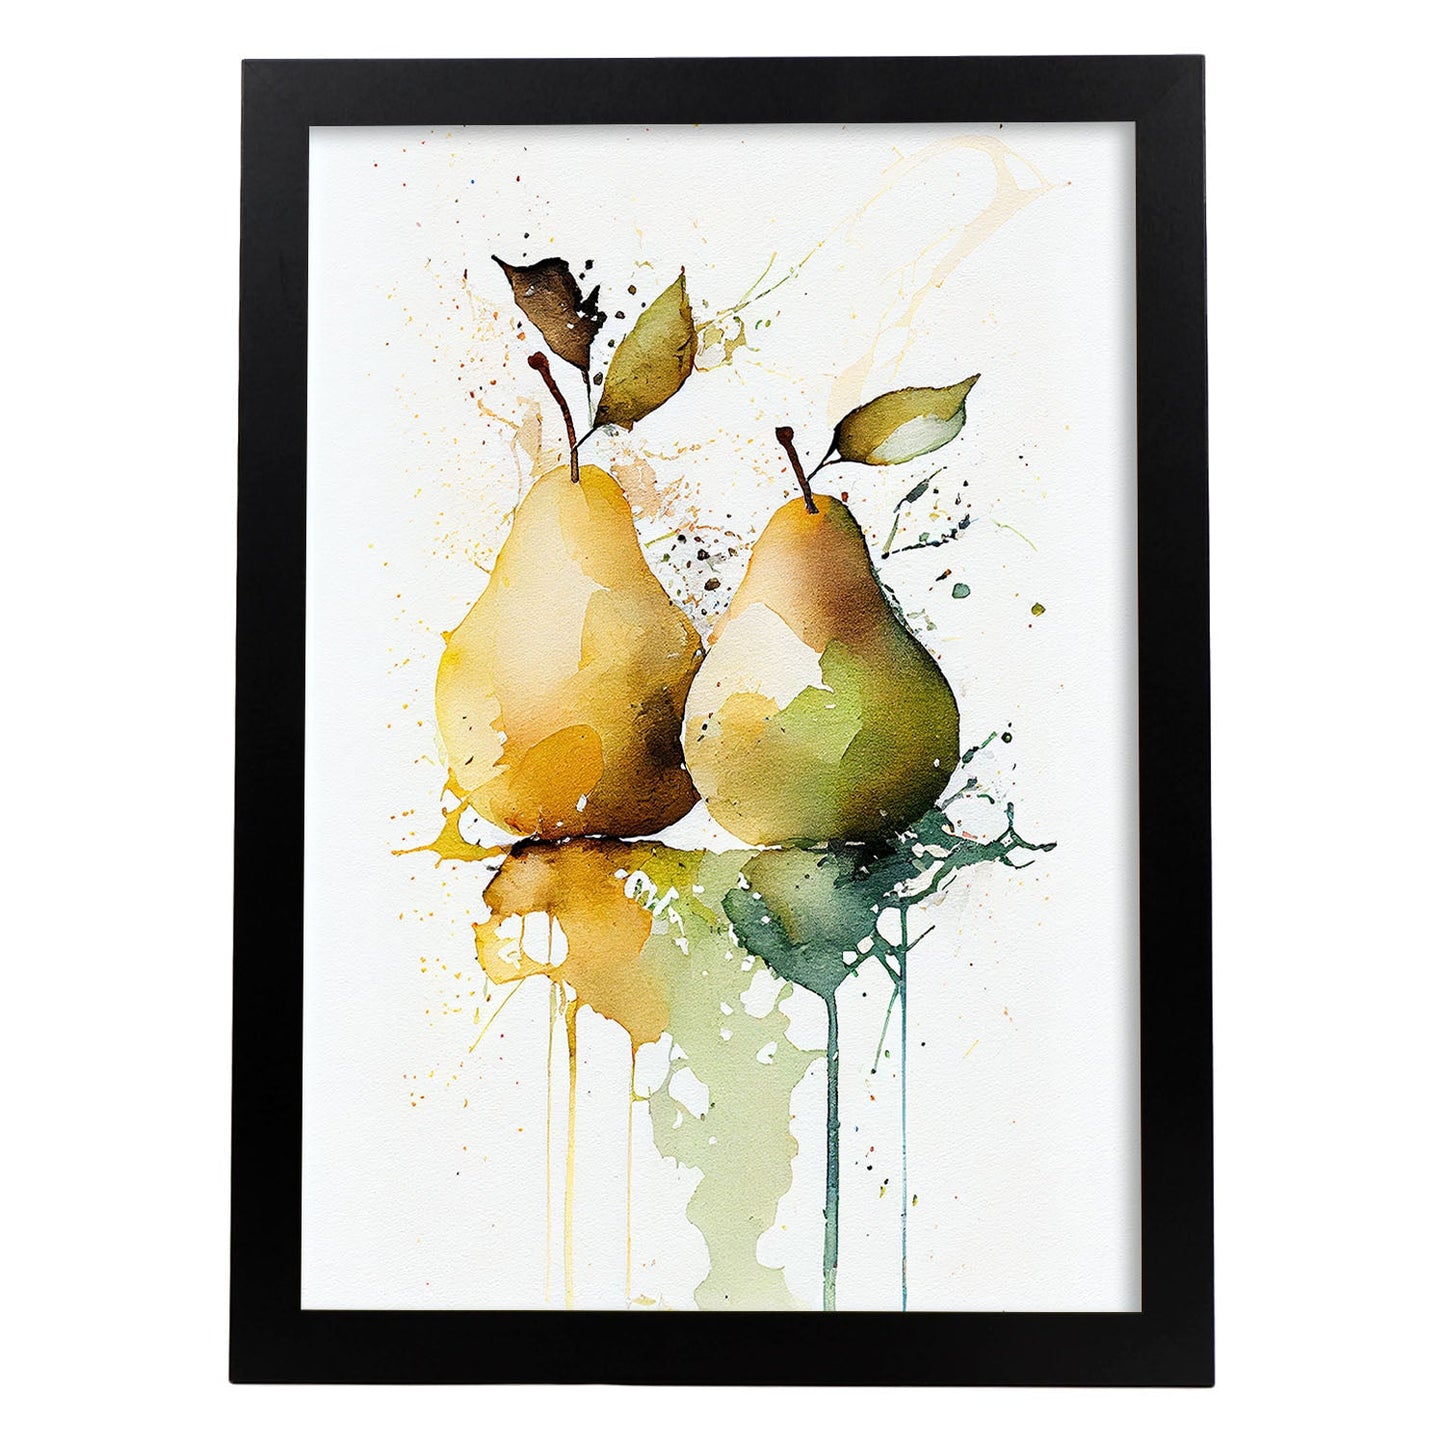 Nacnic minimalist Pears. Aesthetic Wall Art Prints for Bedroom or Living Room Design.